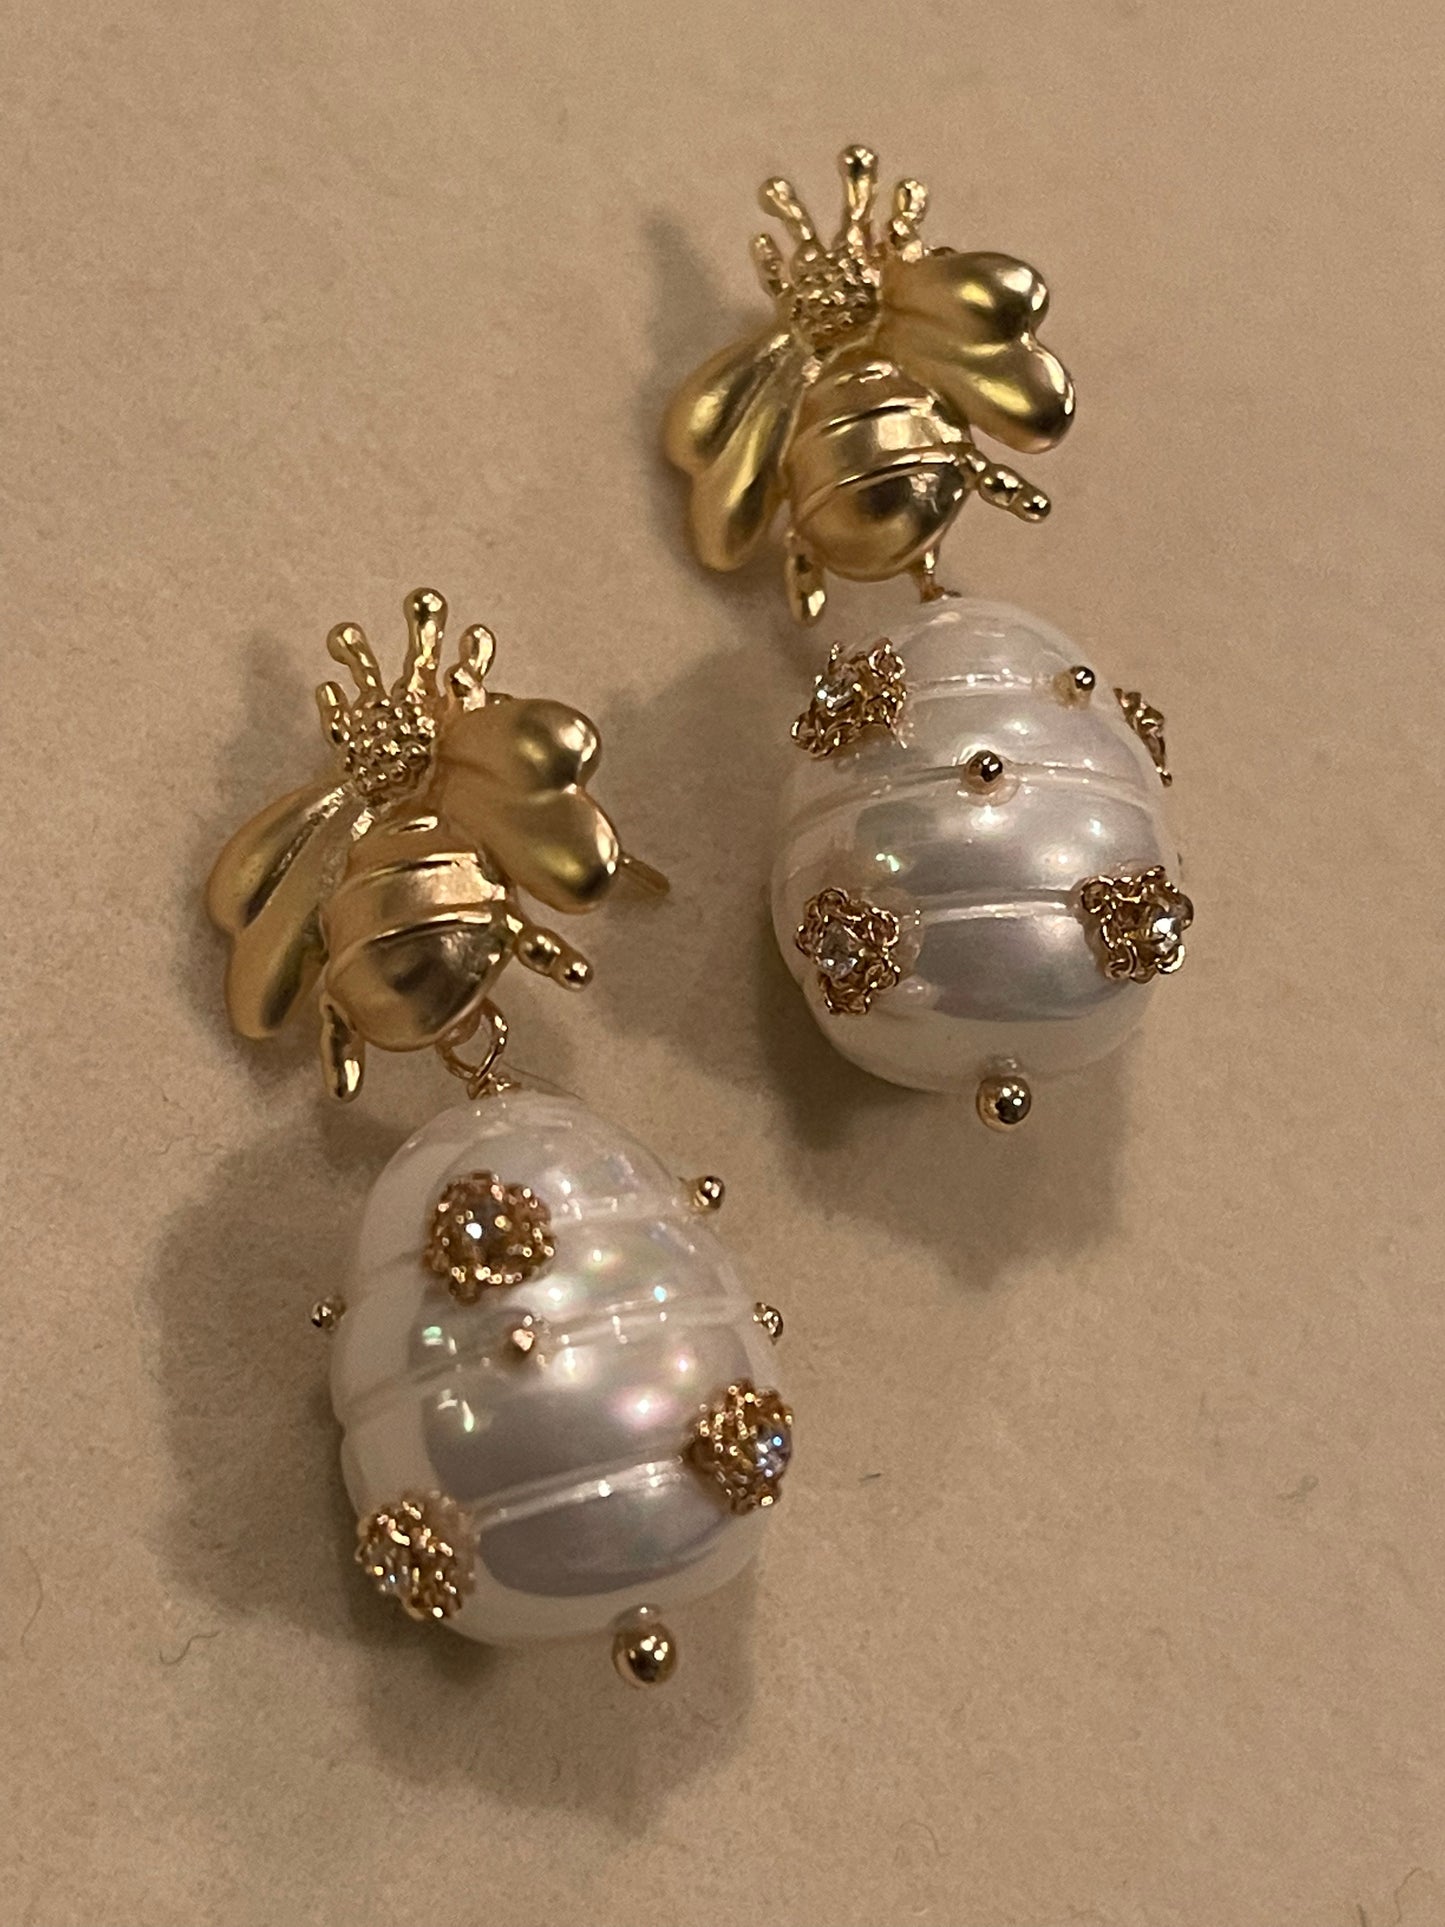 Bees for you earrings